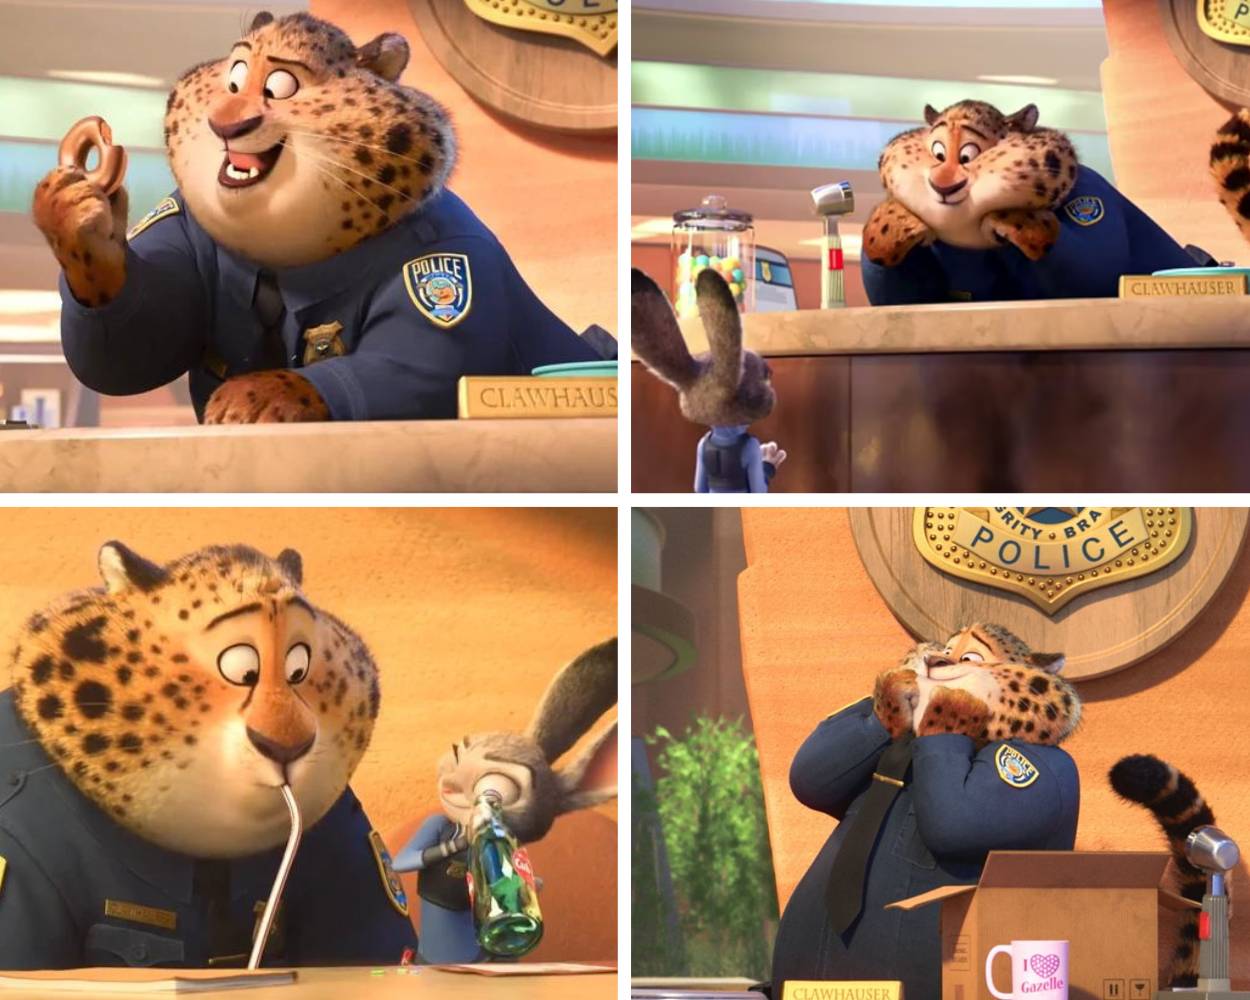 Clawhauser: Zootopia's Loyal Dispatcher